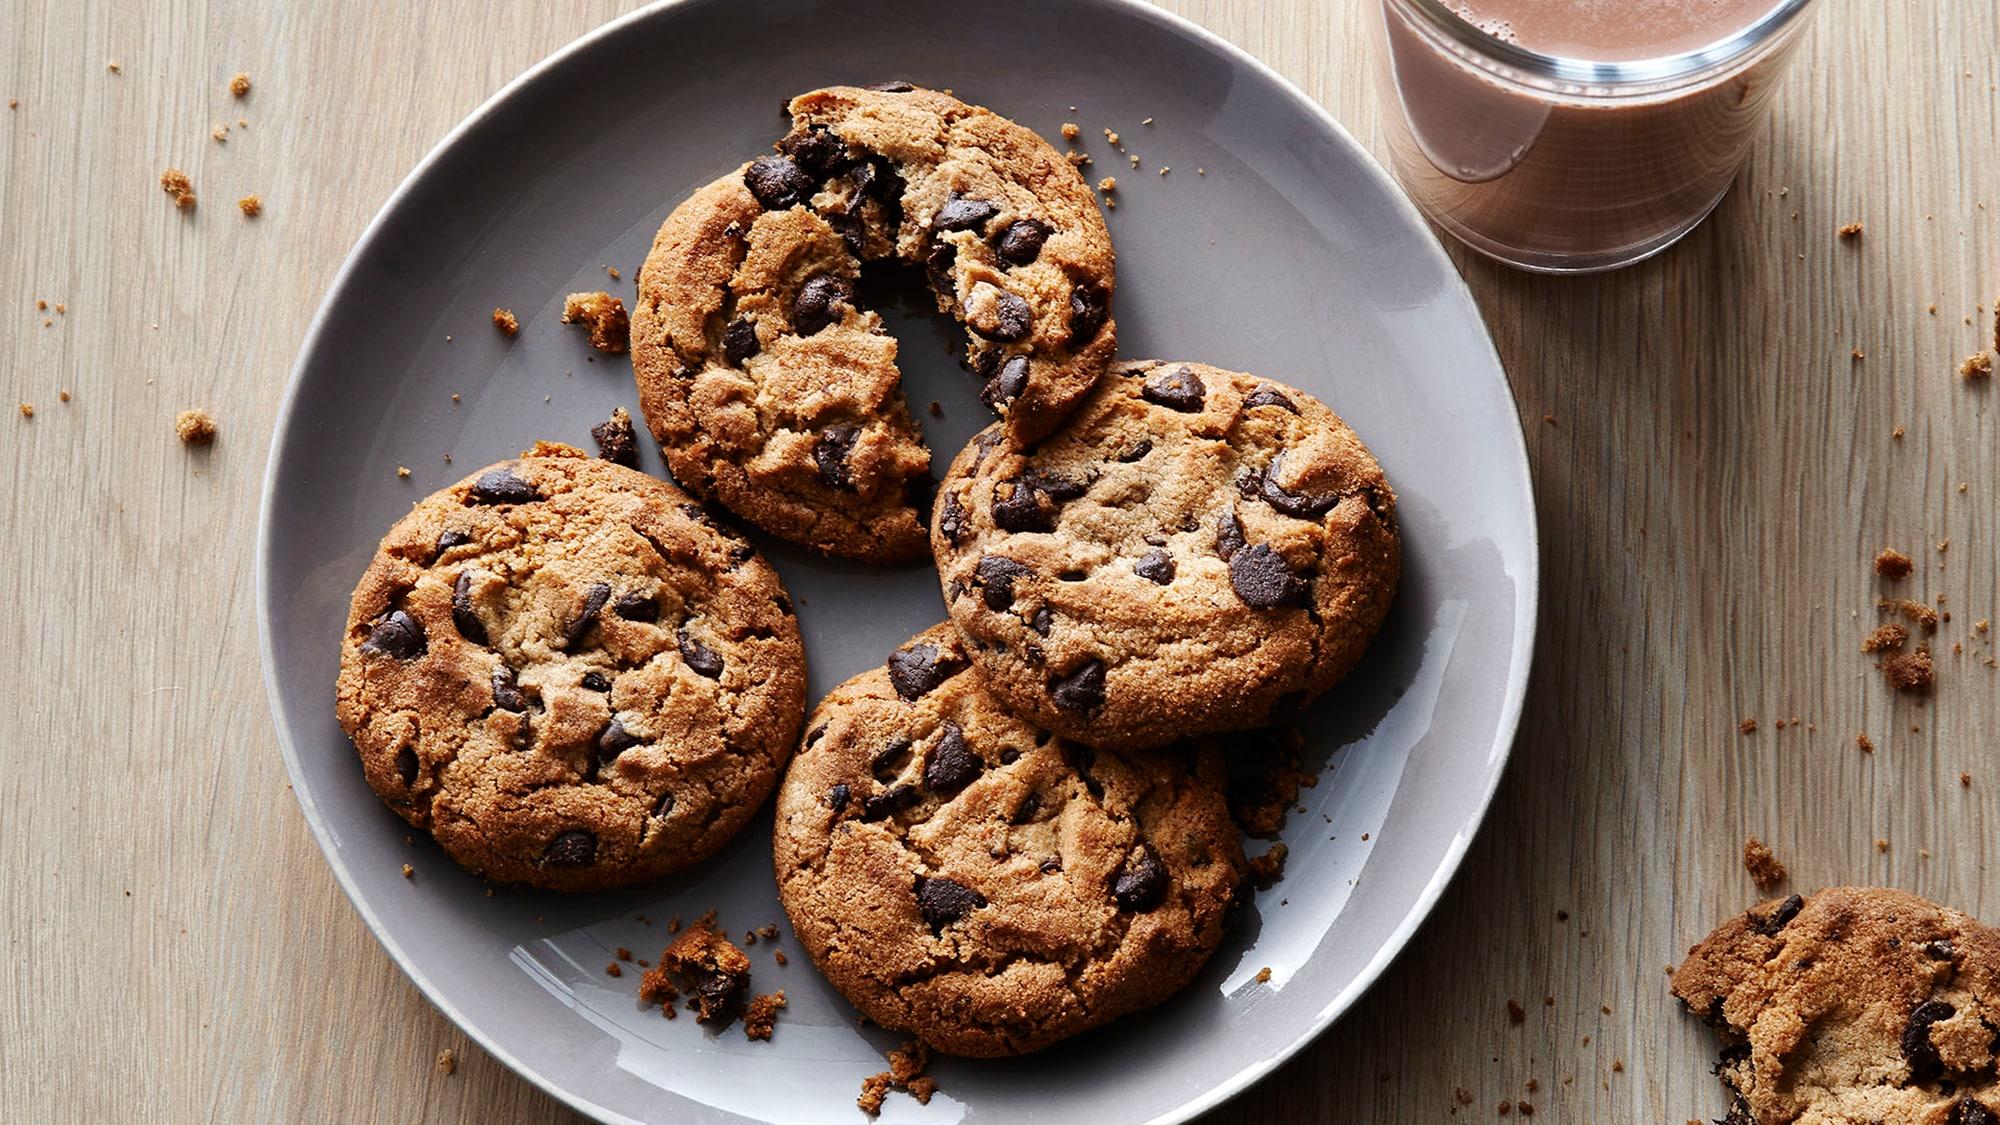 Artfully photographed “the Decadent” PC chocolate chip cookies on a plate. One of them is temptingly broken in half, with crumbs scattered on the plate.